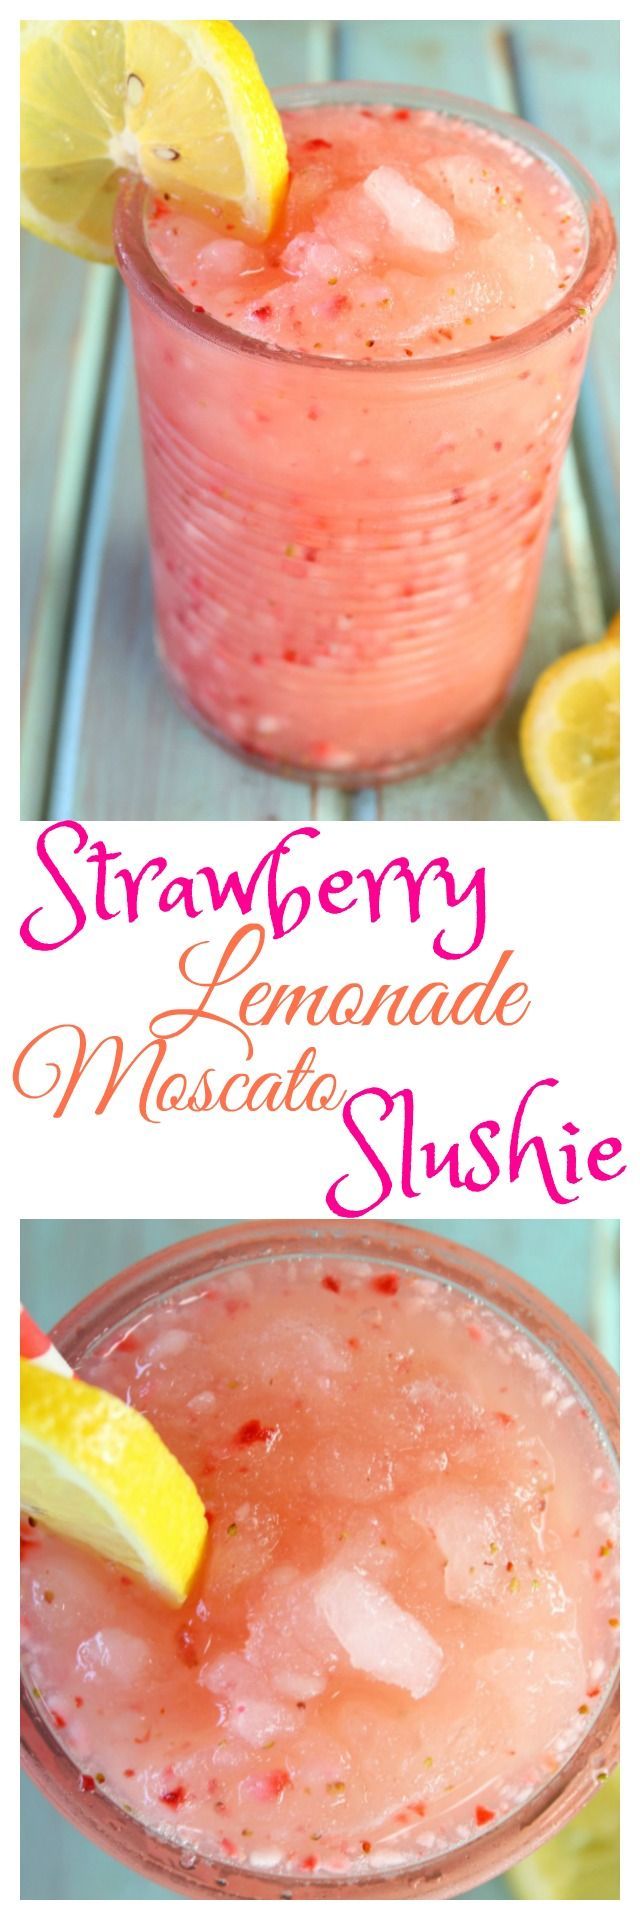 Strawberry Lemonade Moscato Slushie Recipe is a delicious cocktail for summer parties and get togethers. From MissintheKitchen.com